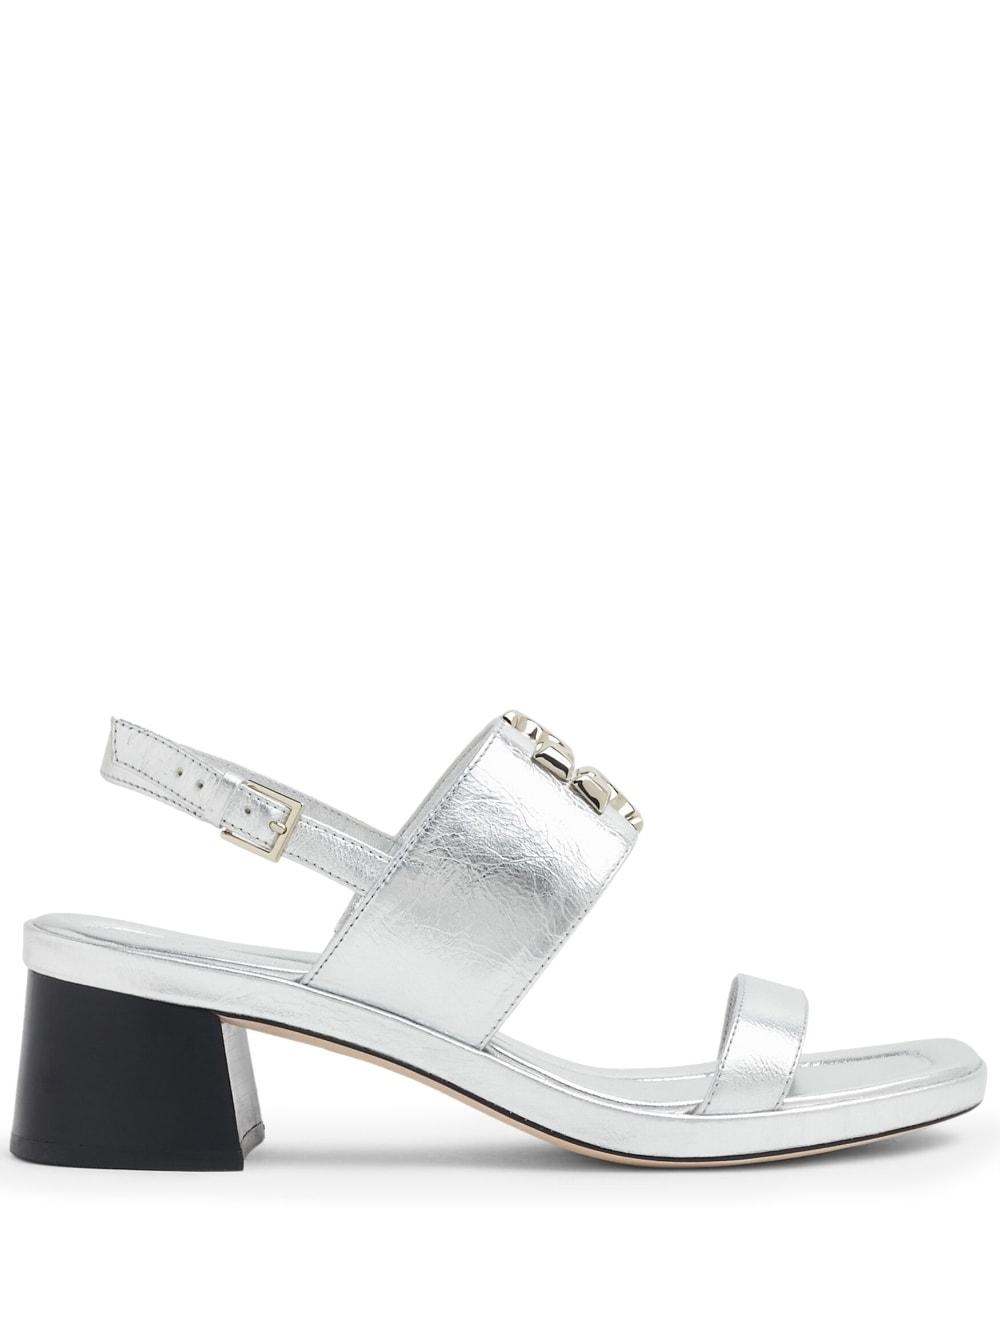 Tory Burch Eleanor 55mm Logo-plaque Sandals in White | Lyst